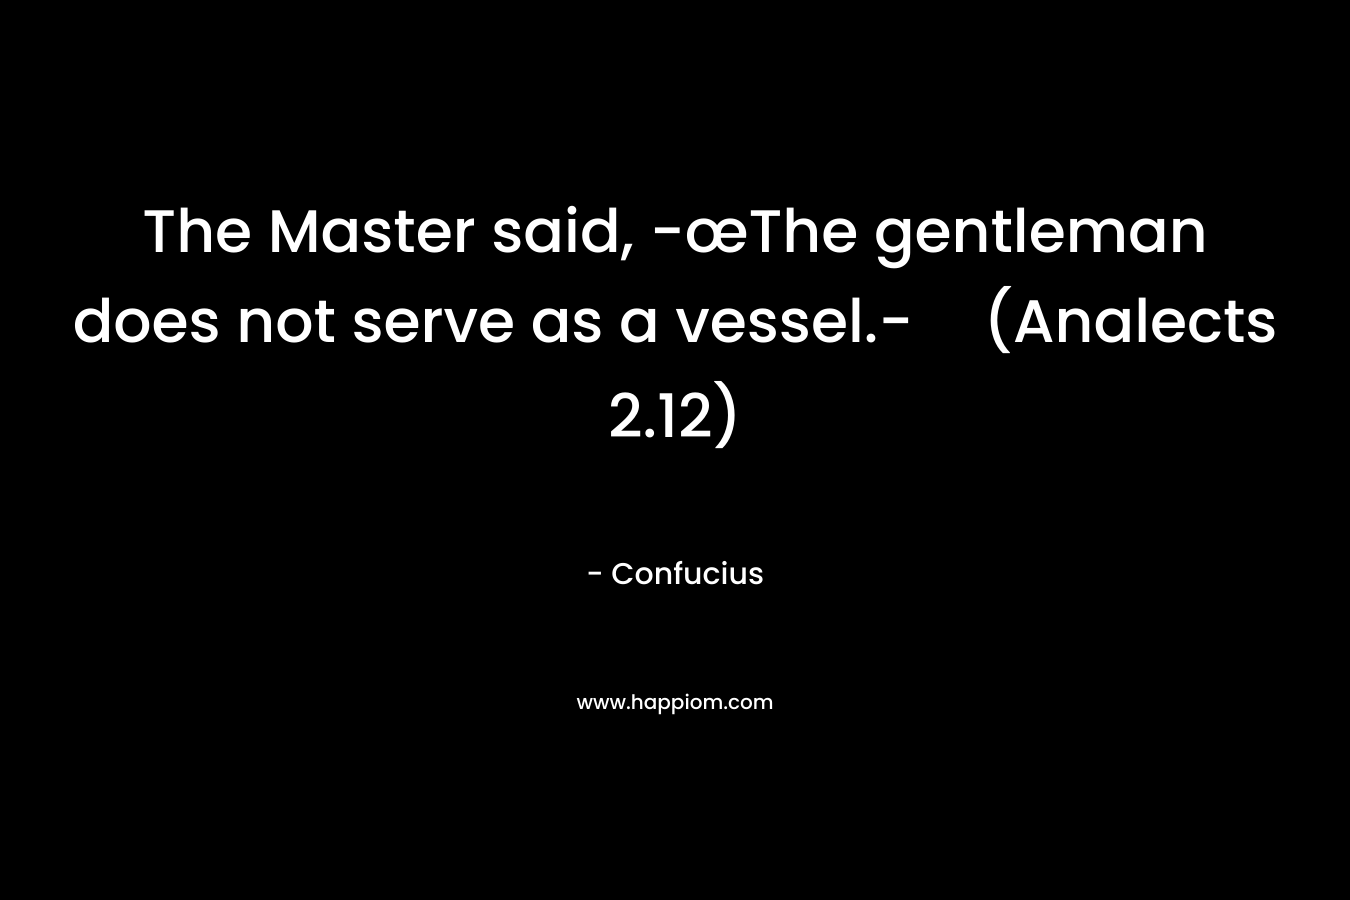 The Master said, -œThe gentleman does not serve as a vessel.-(Analects 2.12) – Confucius